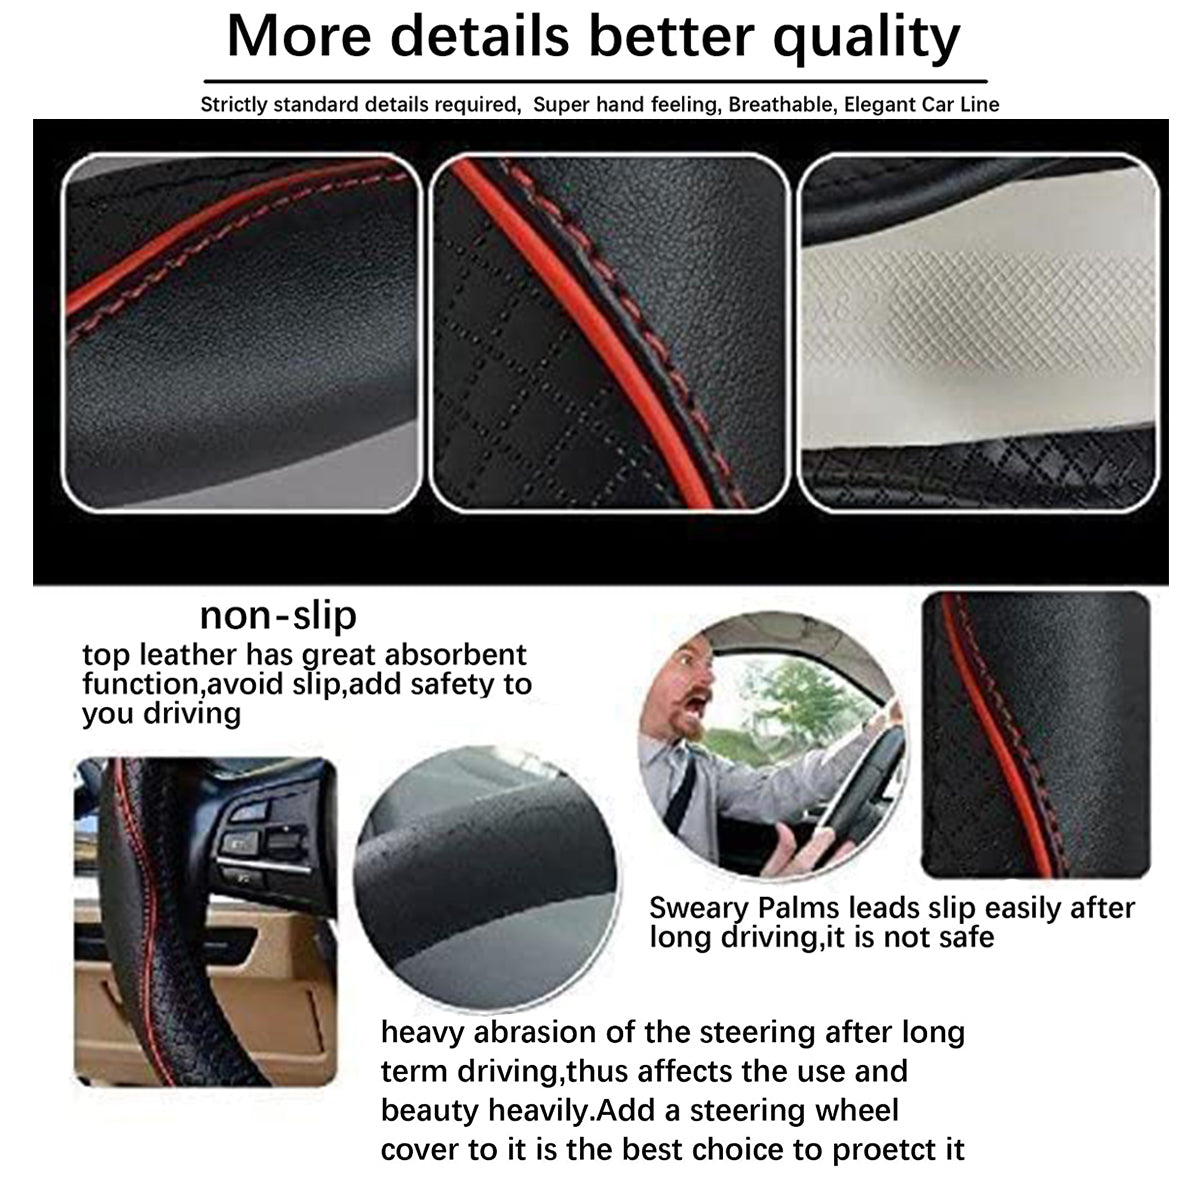 Car Steering Wheel Cover, Custom For Your Cars, Anti-Slip, Safety, Soft, Breathable, Heavy Duty, Thick, Full Surround, Sports Style, Car Accessories PF18990